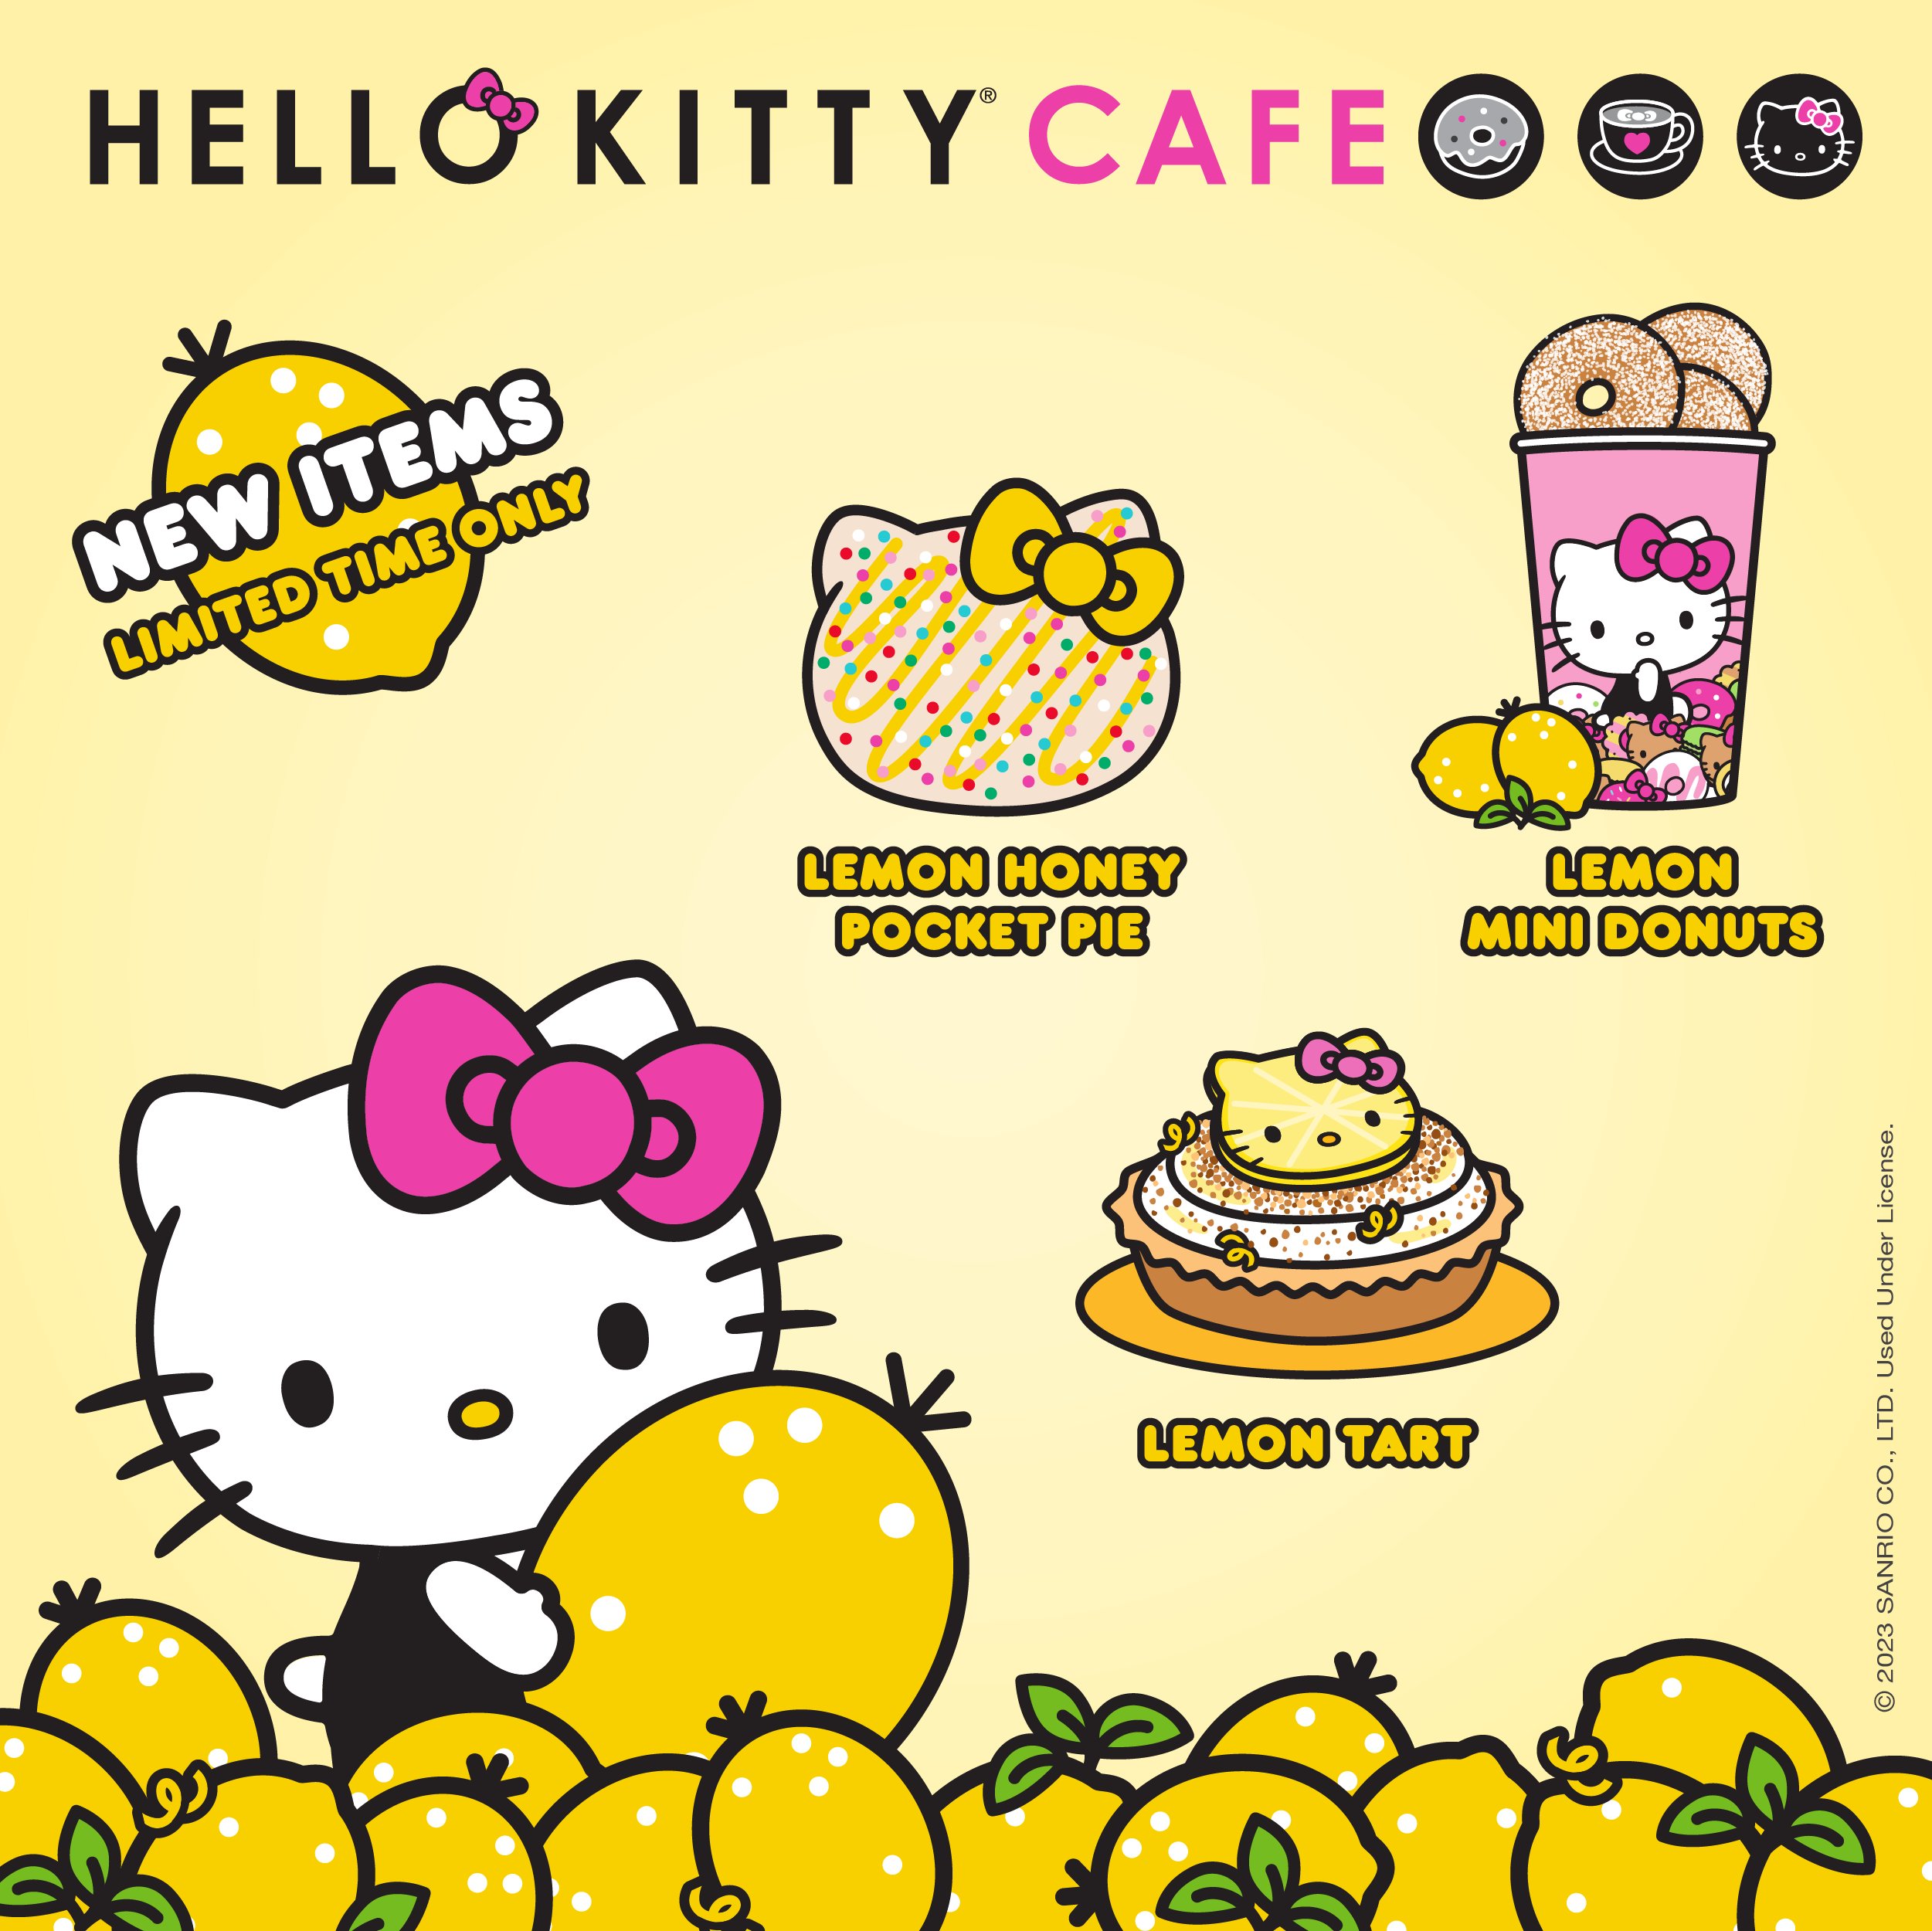 Hello Kitty Cafe on X: Our lemony sweet menu is back! 🍋 Bring